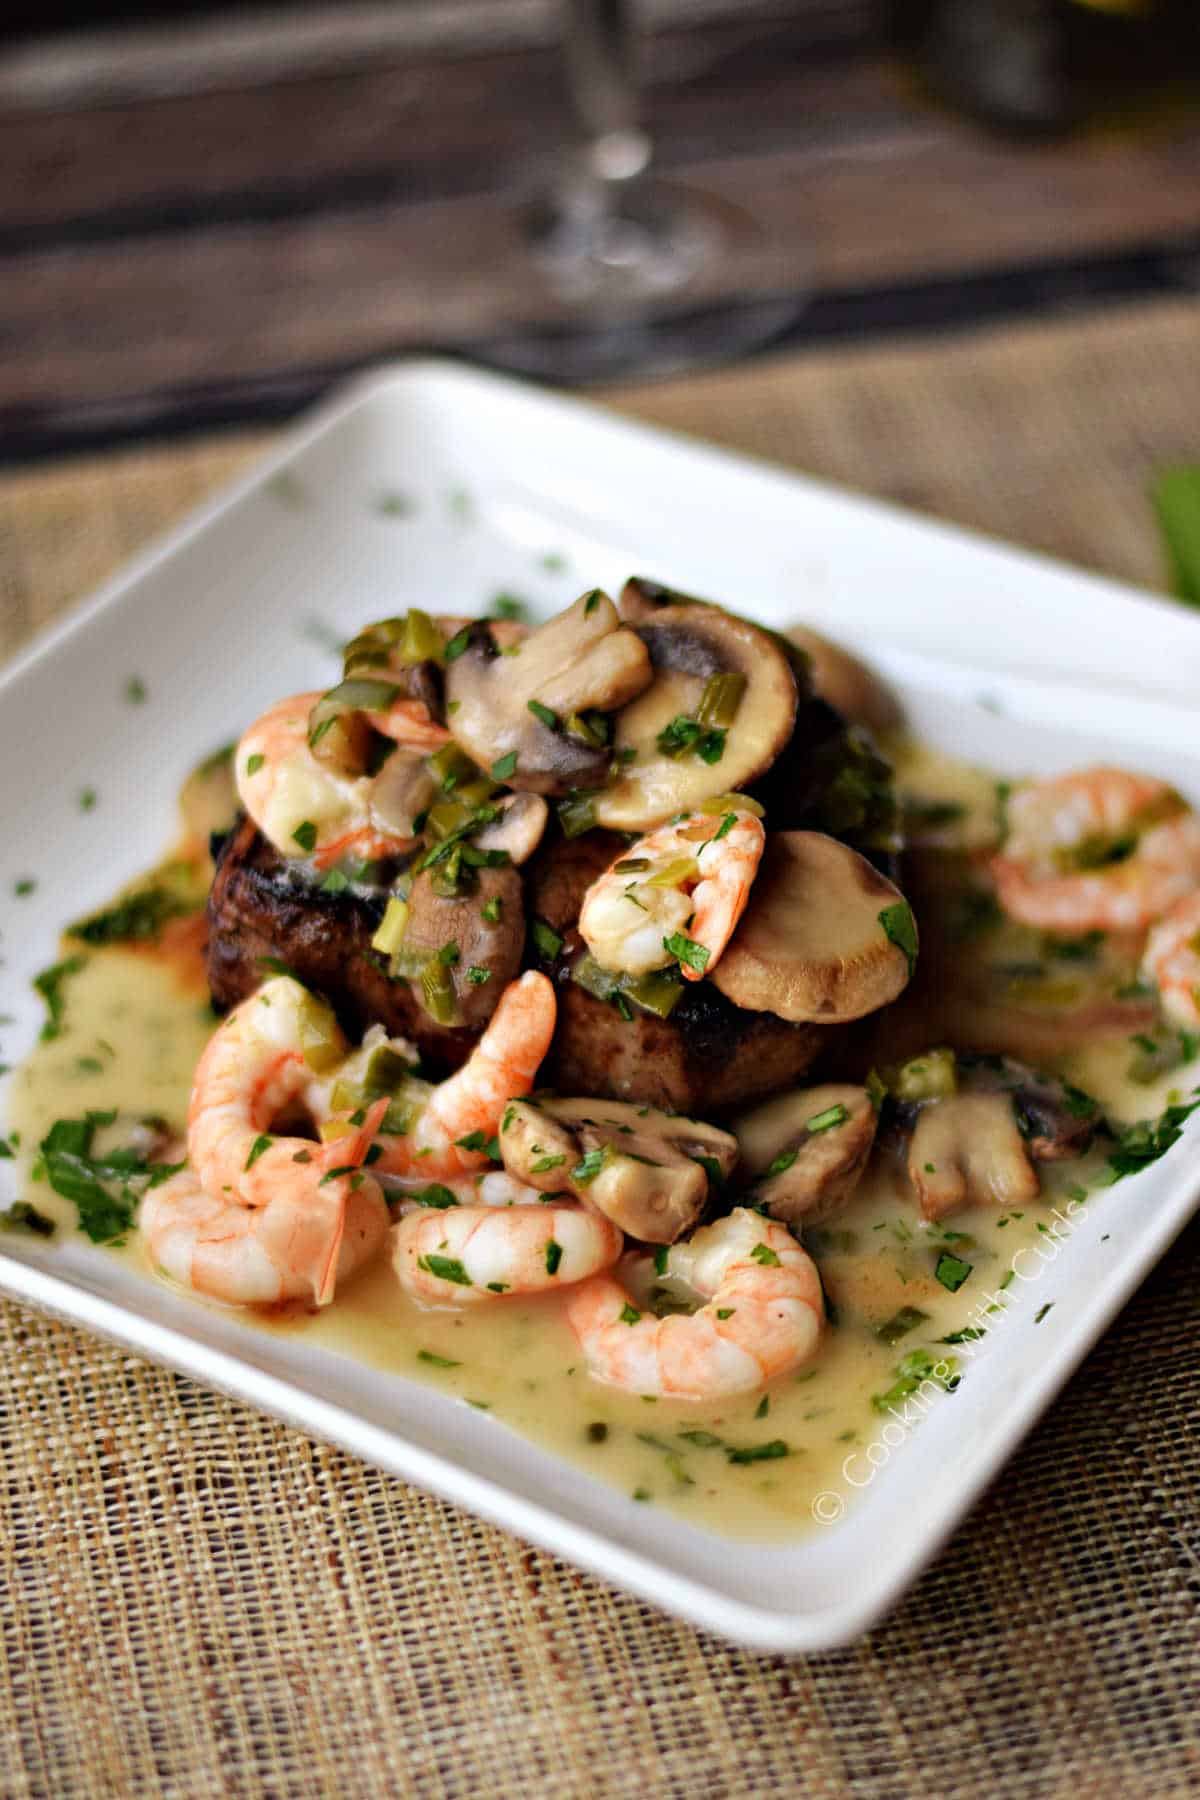 Beef tenderloin topped with a shrimp and mushroom sauce on a square serving plate.